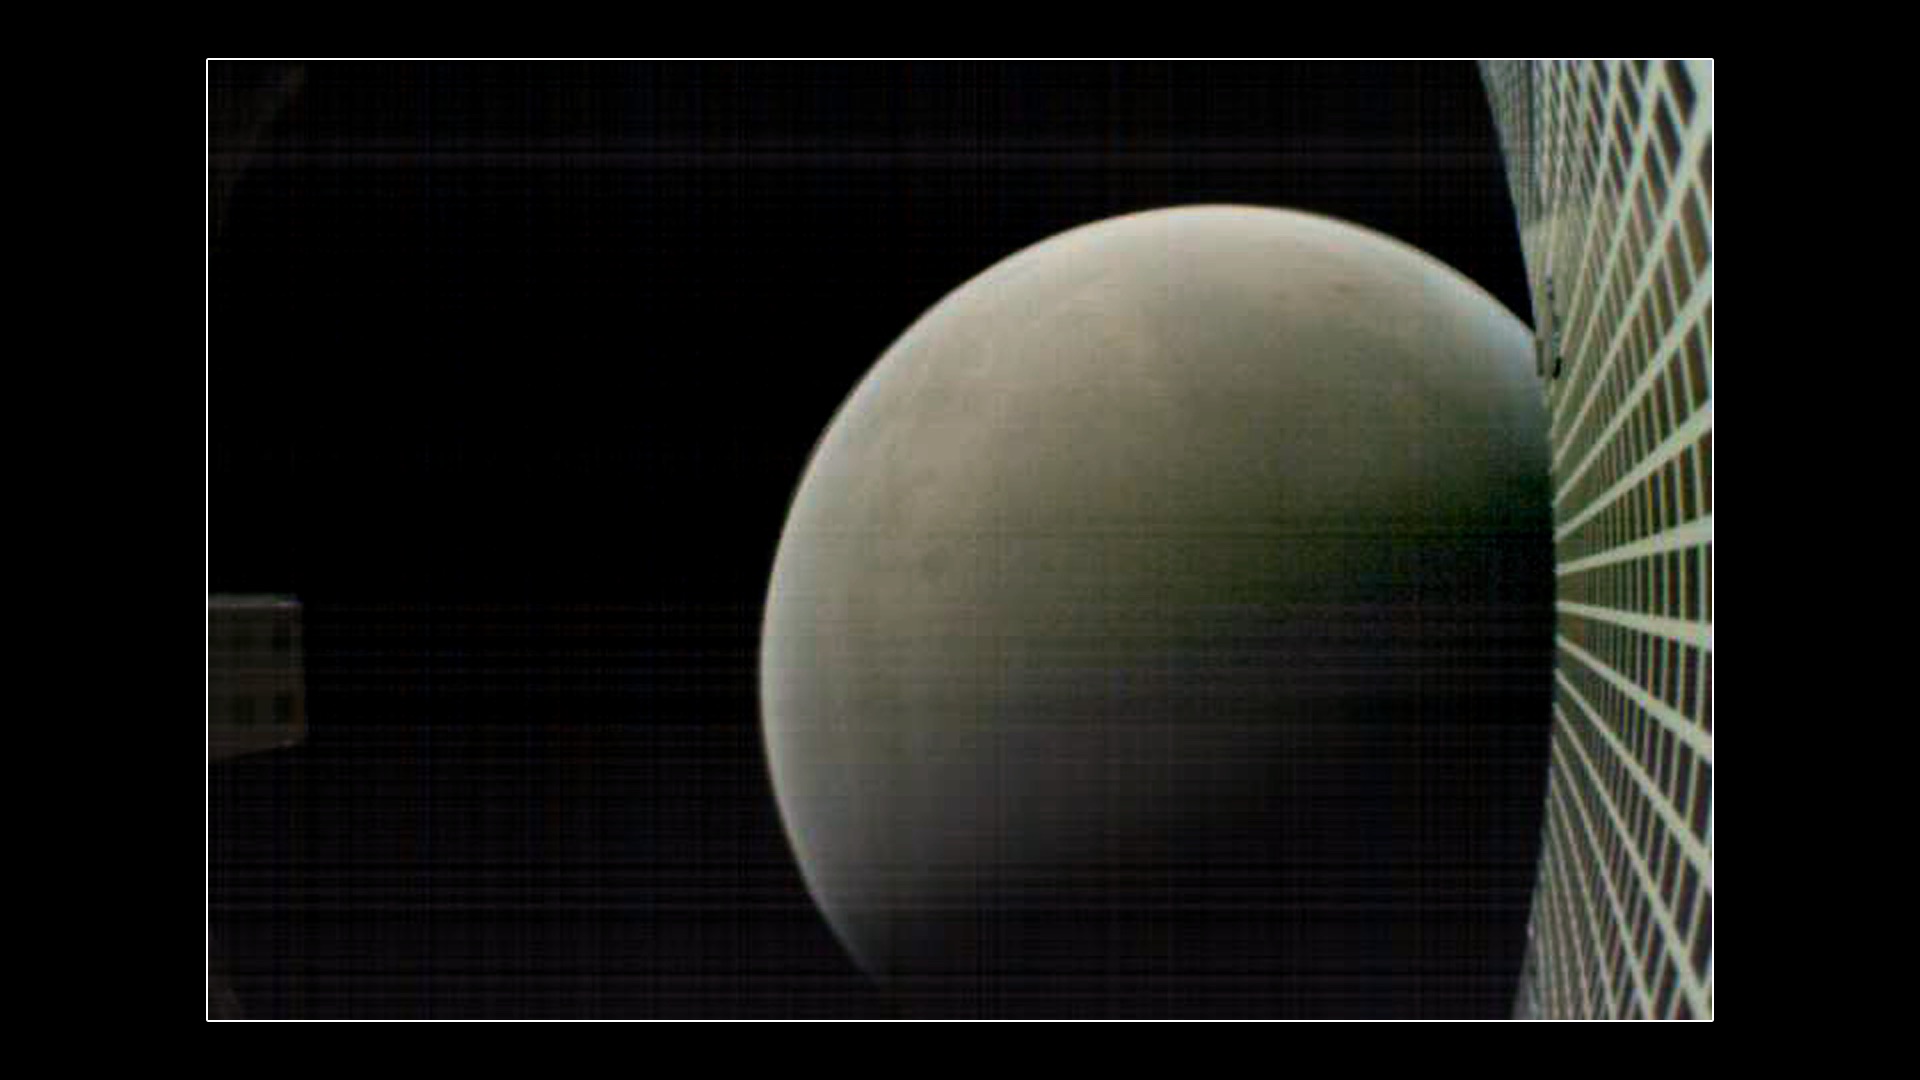 MarCO-B, one of the experimental Mars Cube One (MarCO) CubeSats, took this image of Mars from about 4,700 miles (7,600 kilometers) away during its flyby of the Red Planet on Nov. 26, 2018. MarCO-B was flying by Mars with its twin, MarCO-A, to attempt to serve as communications relays for NASA’s InSight spacecraft as it landed on Mars.